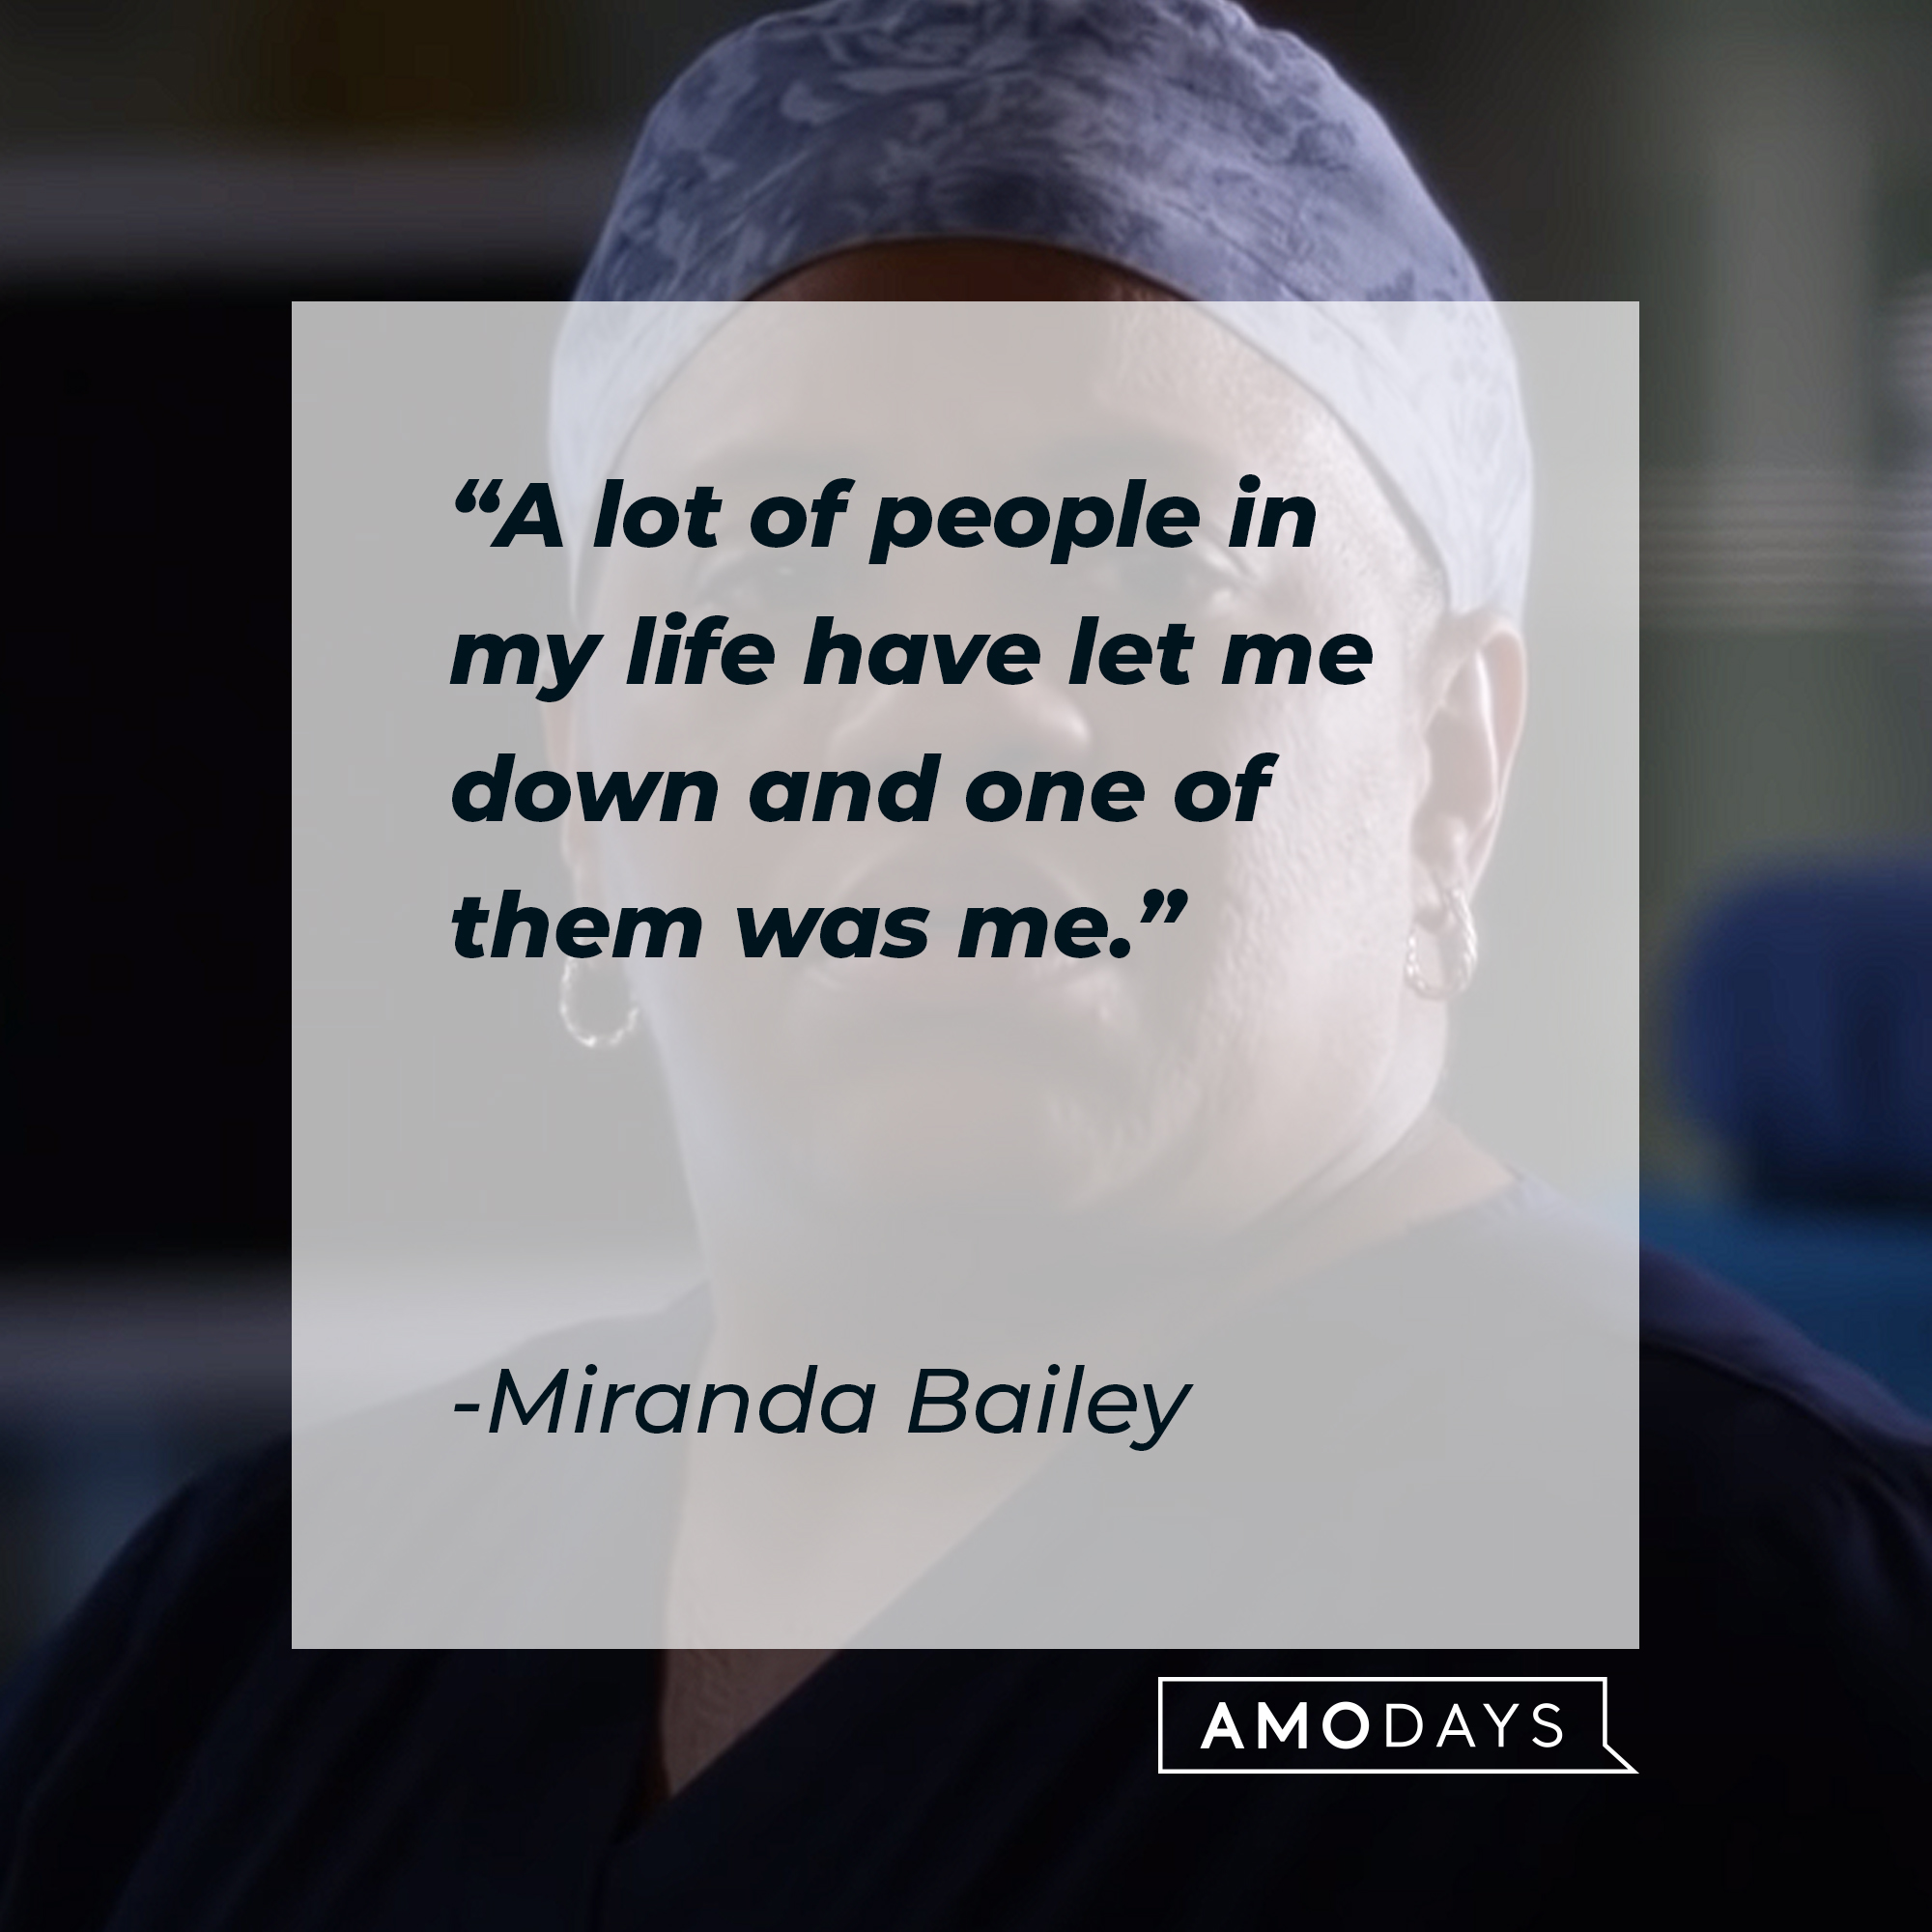 Miranda Bailey's quote: "A lot of people in my life have let me down and one of them was me." | Source: youtube.com/ABCNetwork